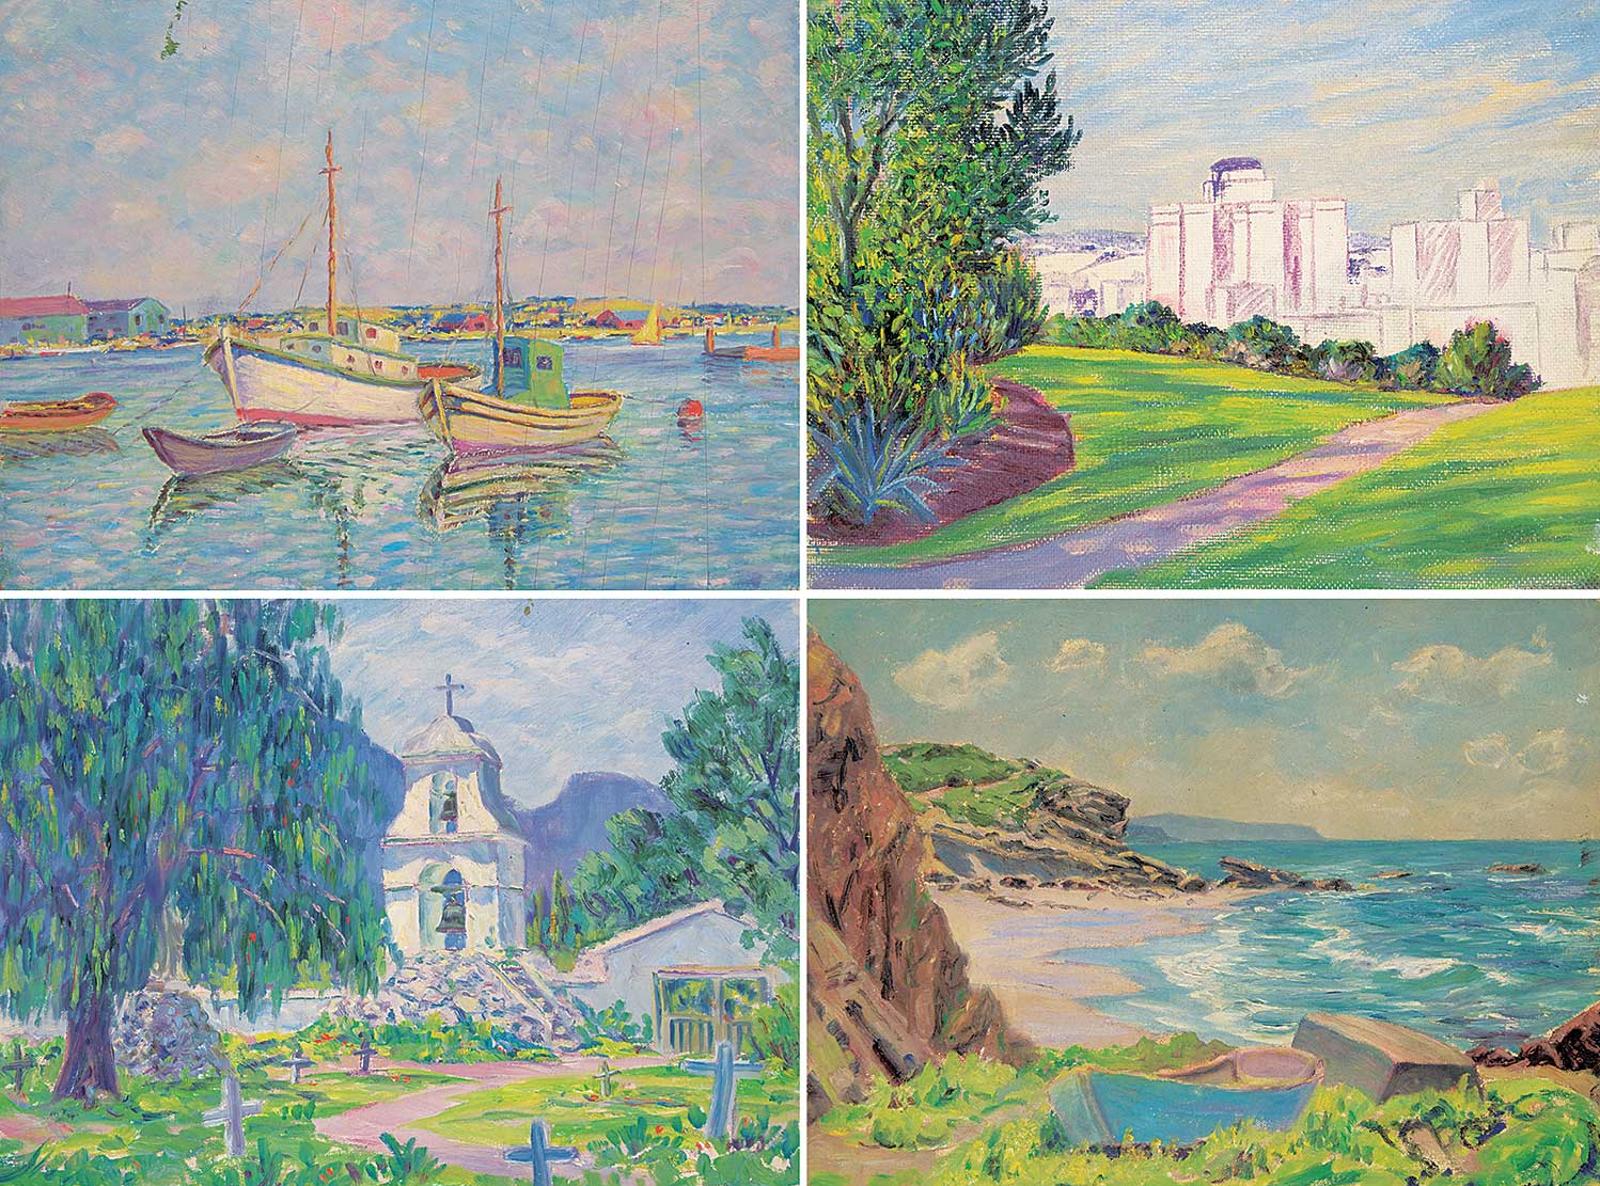 Arthur Kellet - Lot of Four Paintings [Chapel / Fishing Boats / Cove / Unfinished Cityscape]